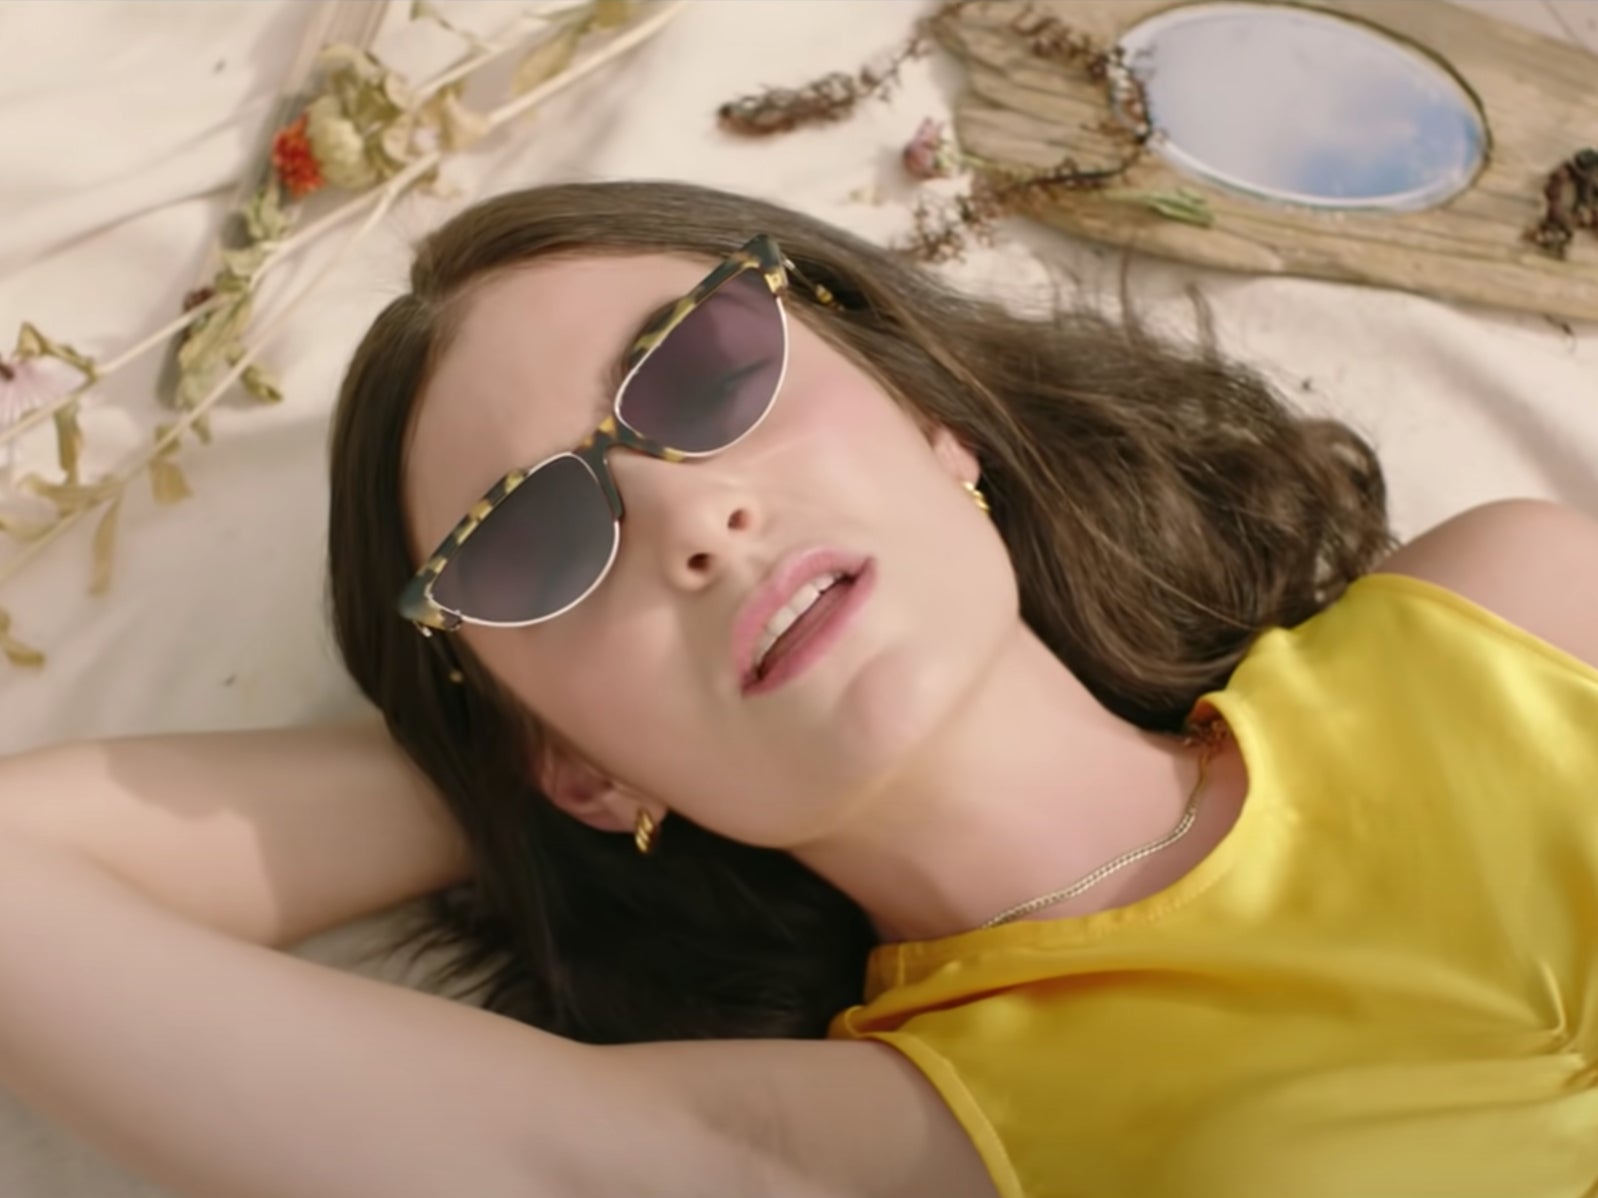 Lorde in the ‘Solar Power’ video